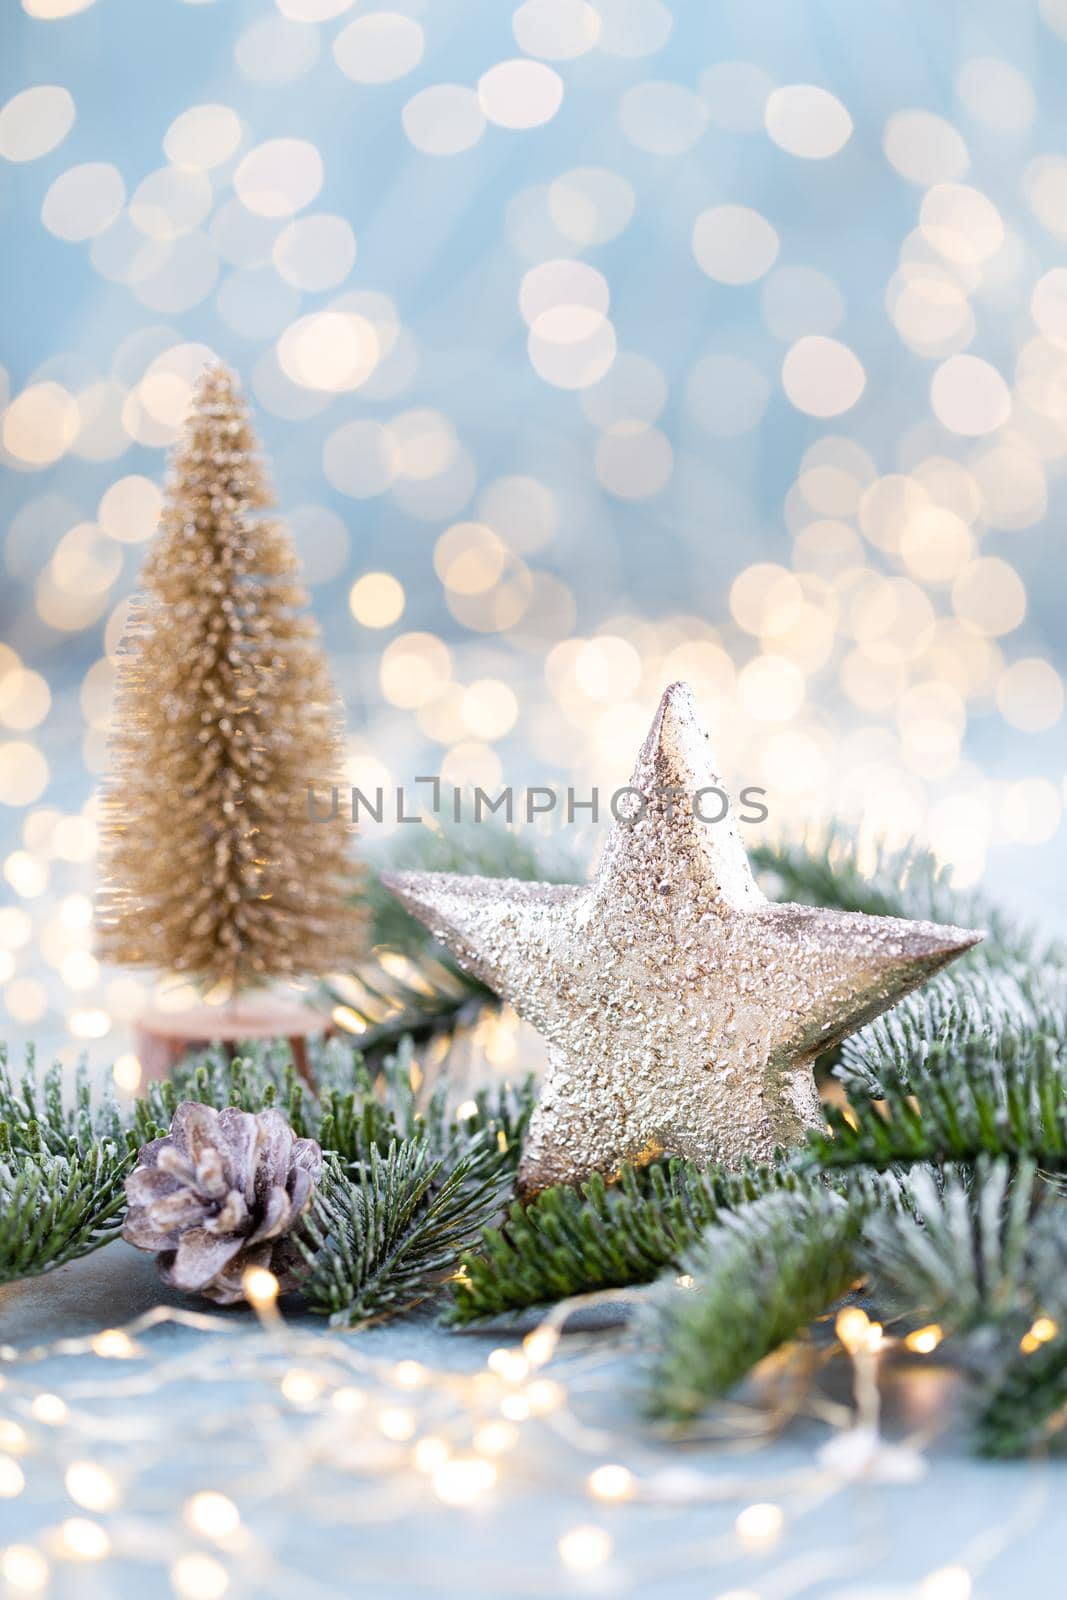 Christmas spruce with star and blurred shiny lights. by gitusik